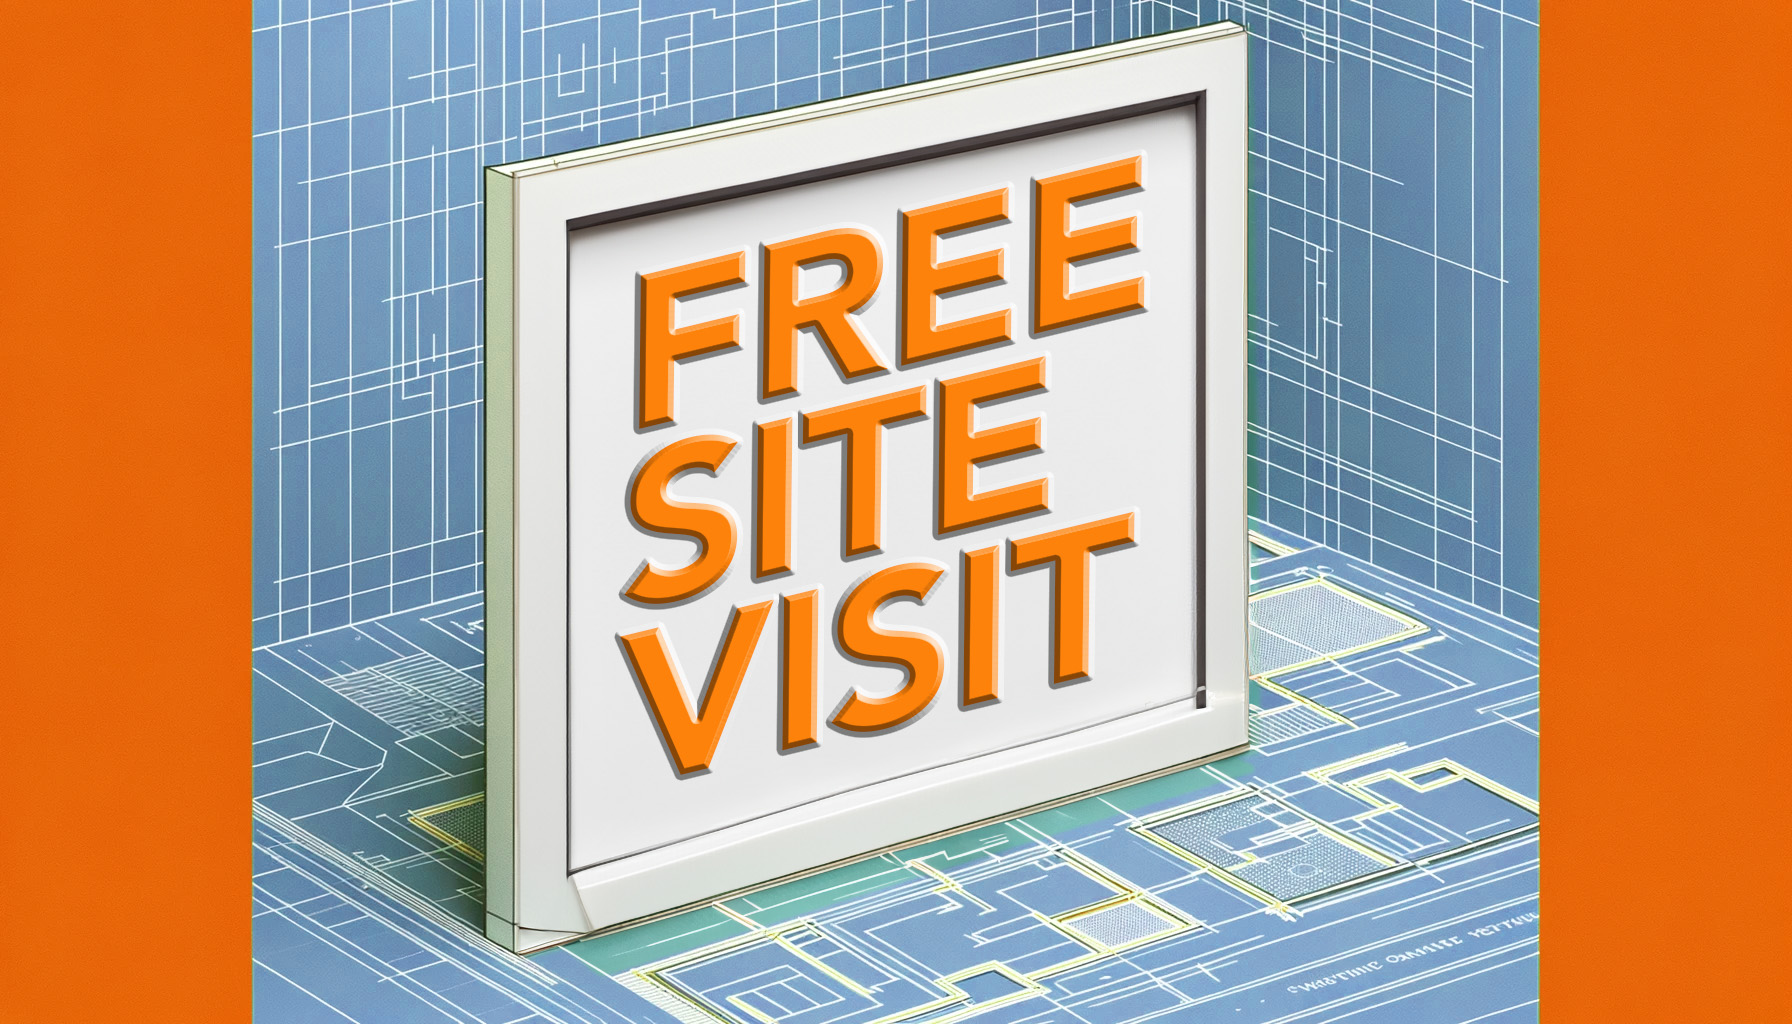 Free Site Visit title image with 3D view hinting at blueprints and the work that goes into building a home